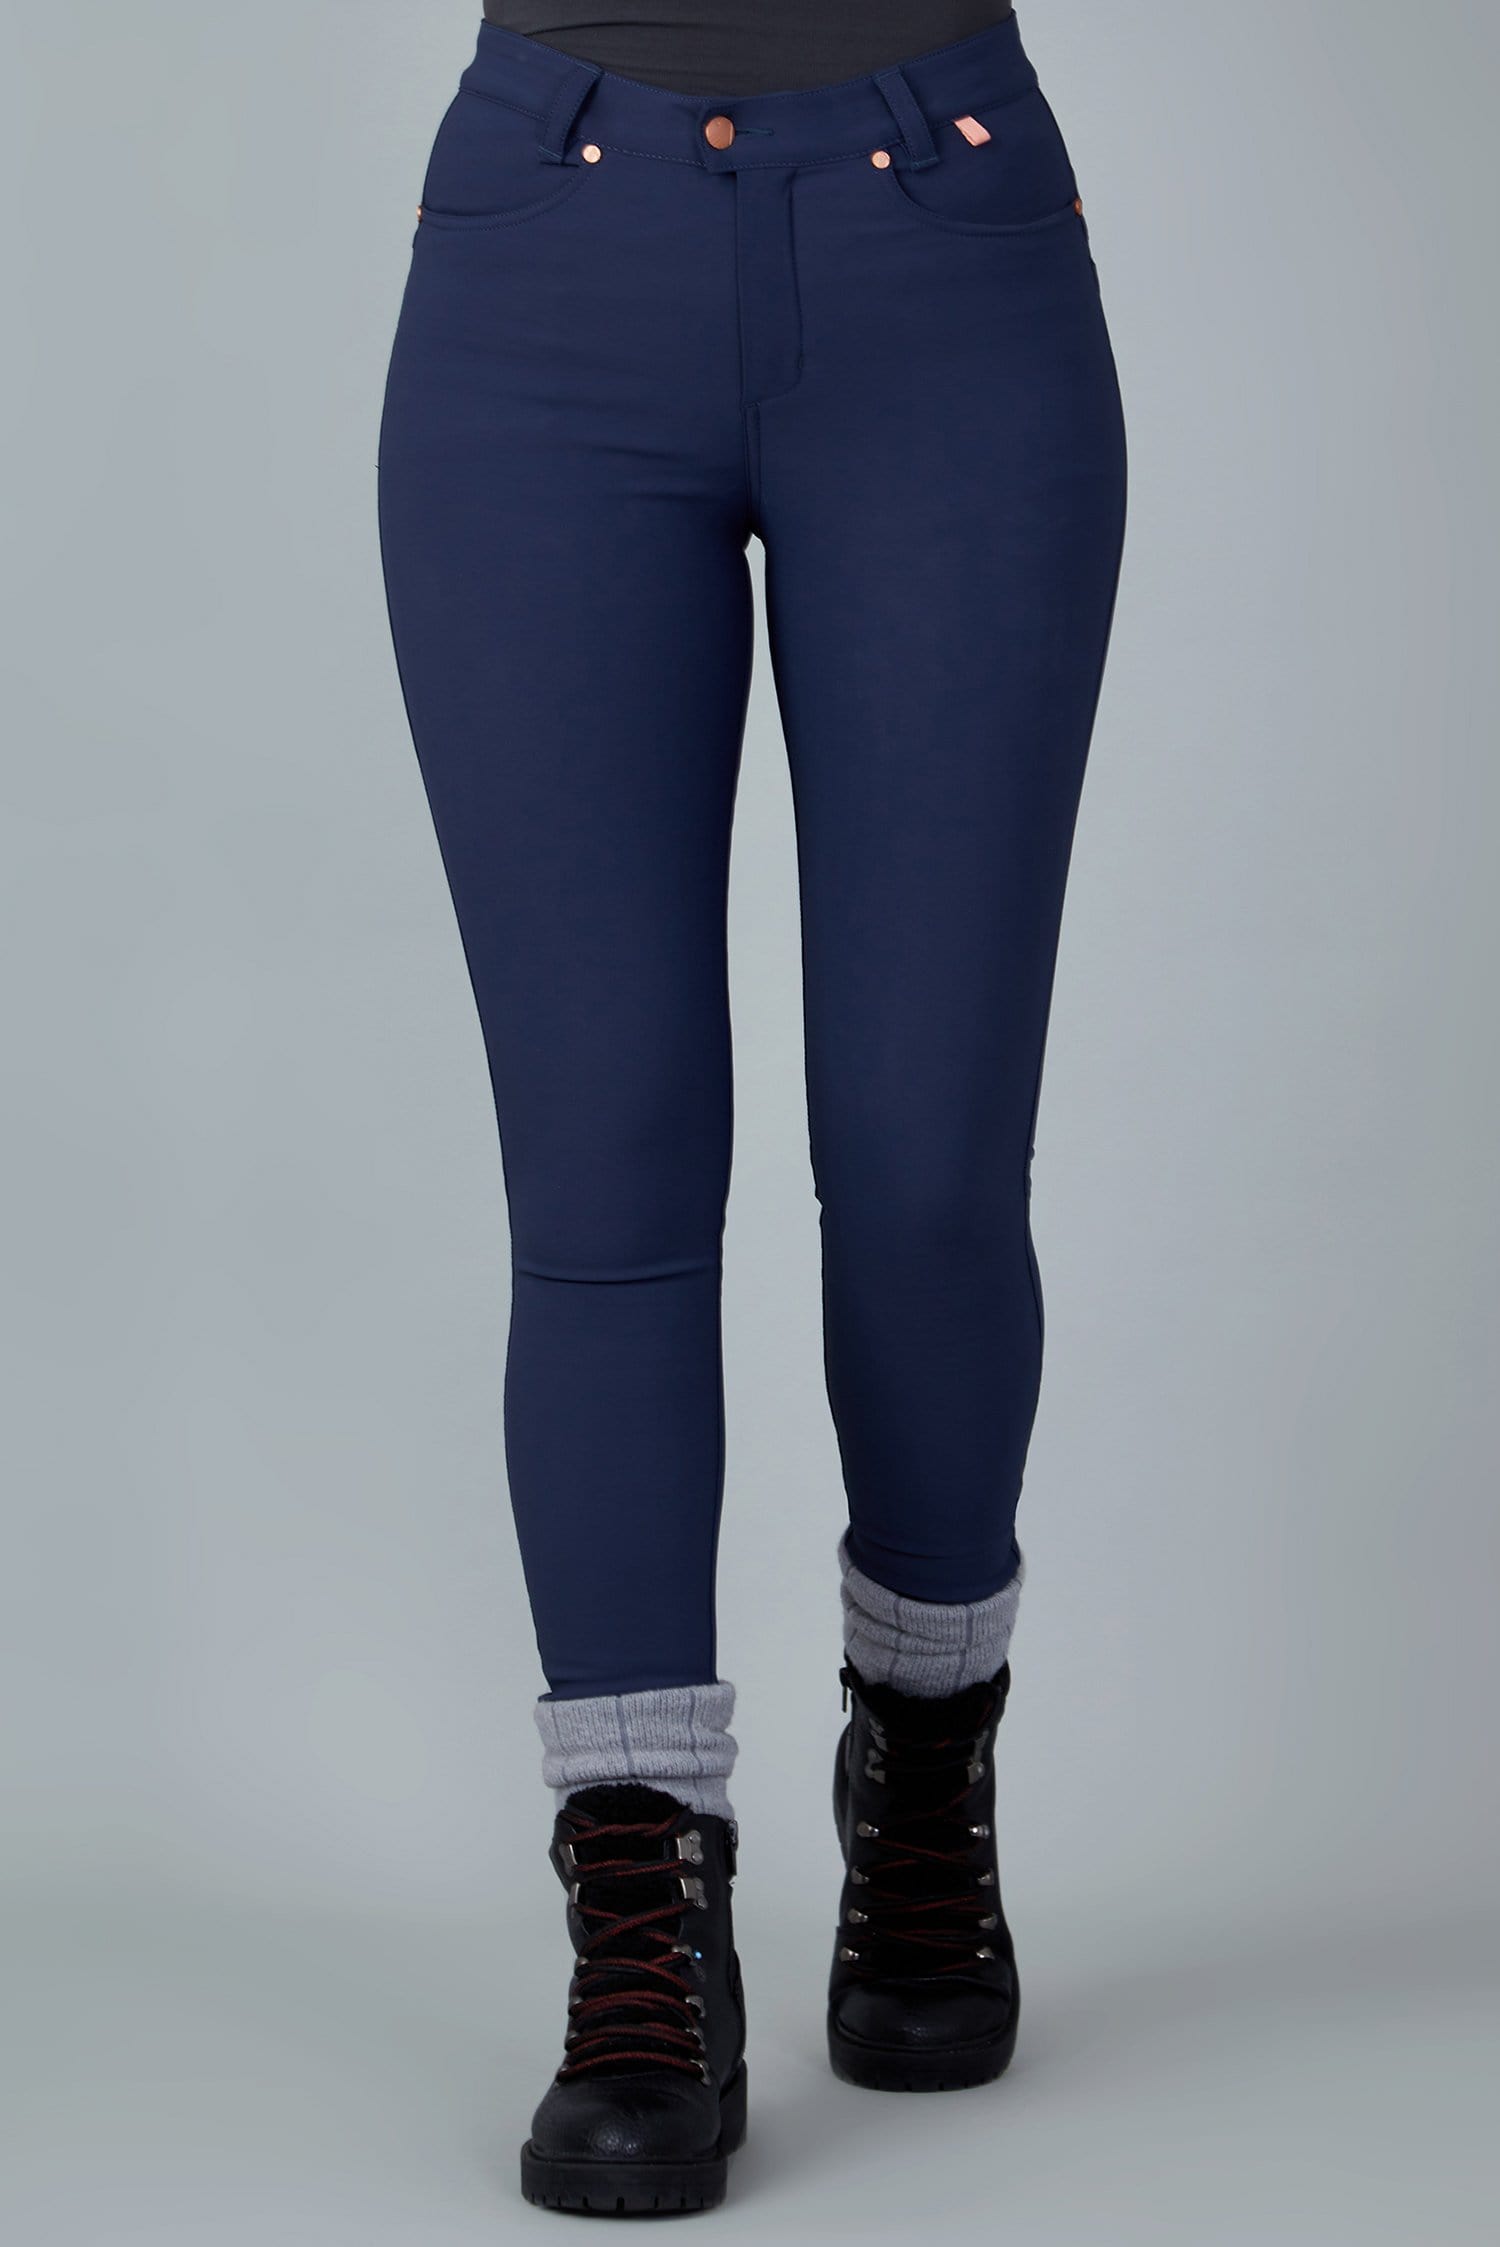 The Aventurite Stretch Skinny Outdoor Trousers - Midnight Blue - 34p / Uk16 - Womens - Acai Outdoorwear